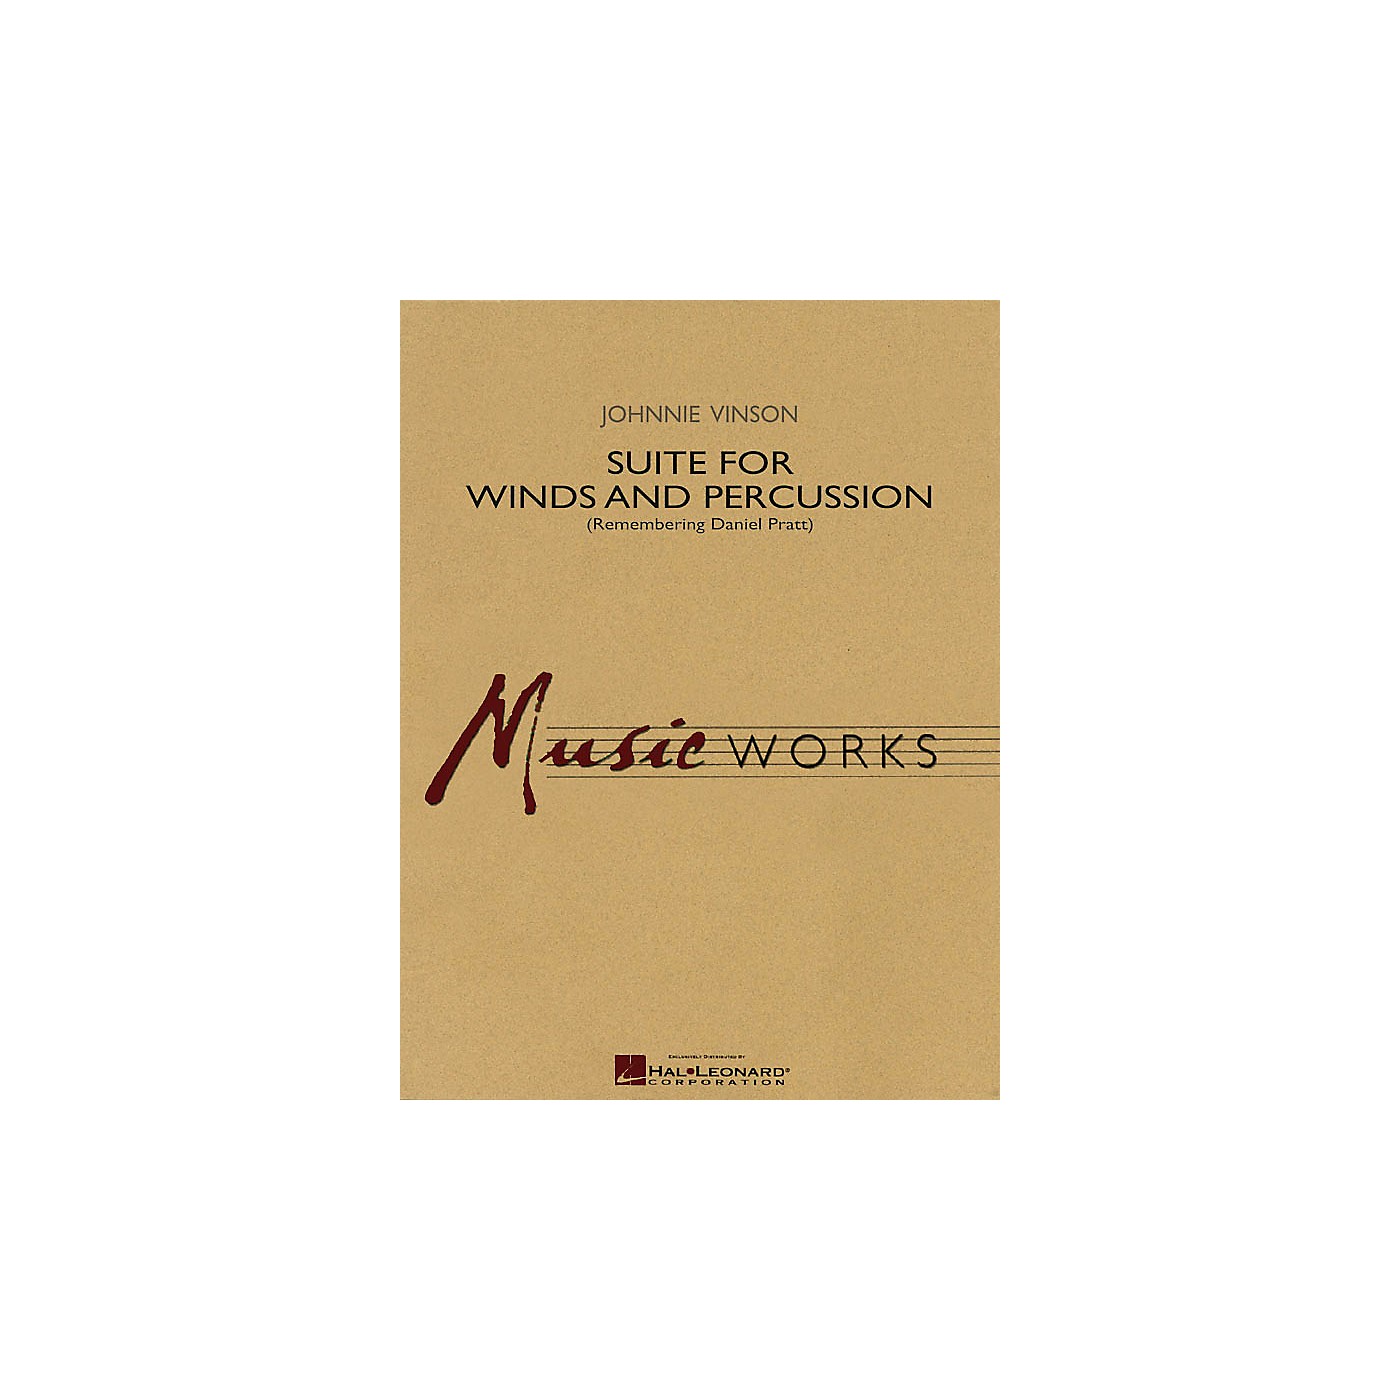 Hal Leonard Suite for Winds and Percussion Concert Band Level 4 Composed by Johnnie Vinson thumbnail